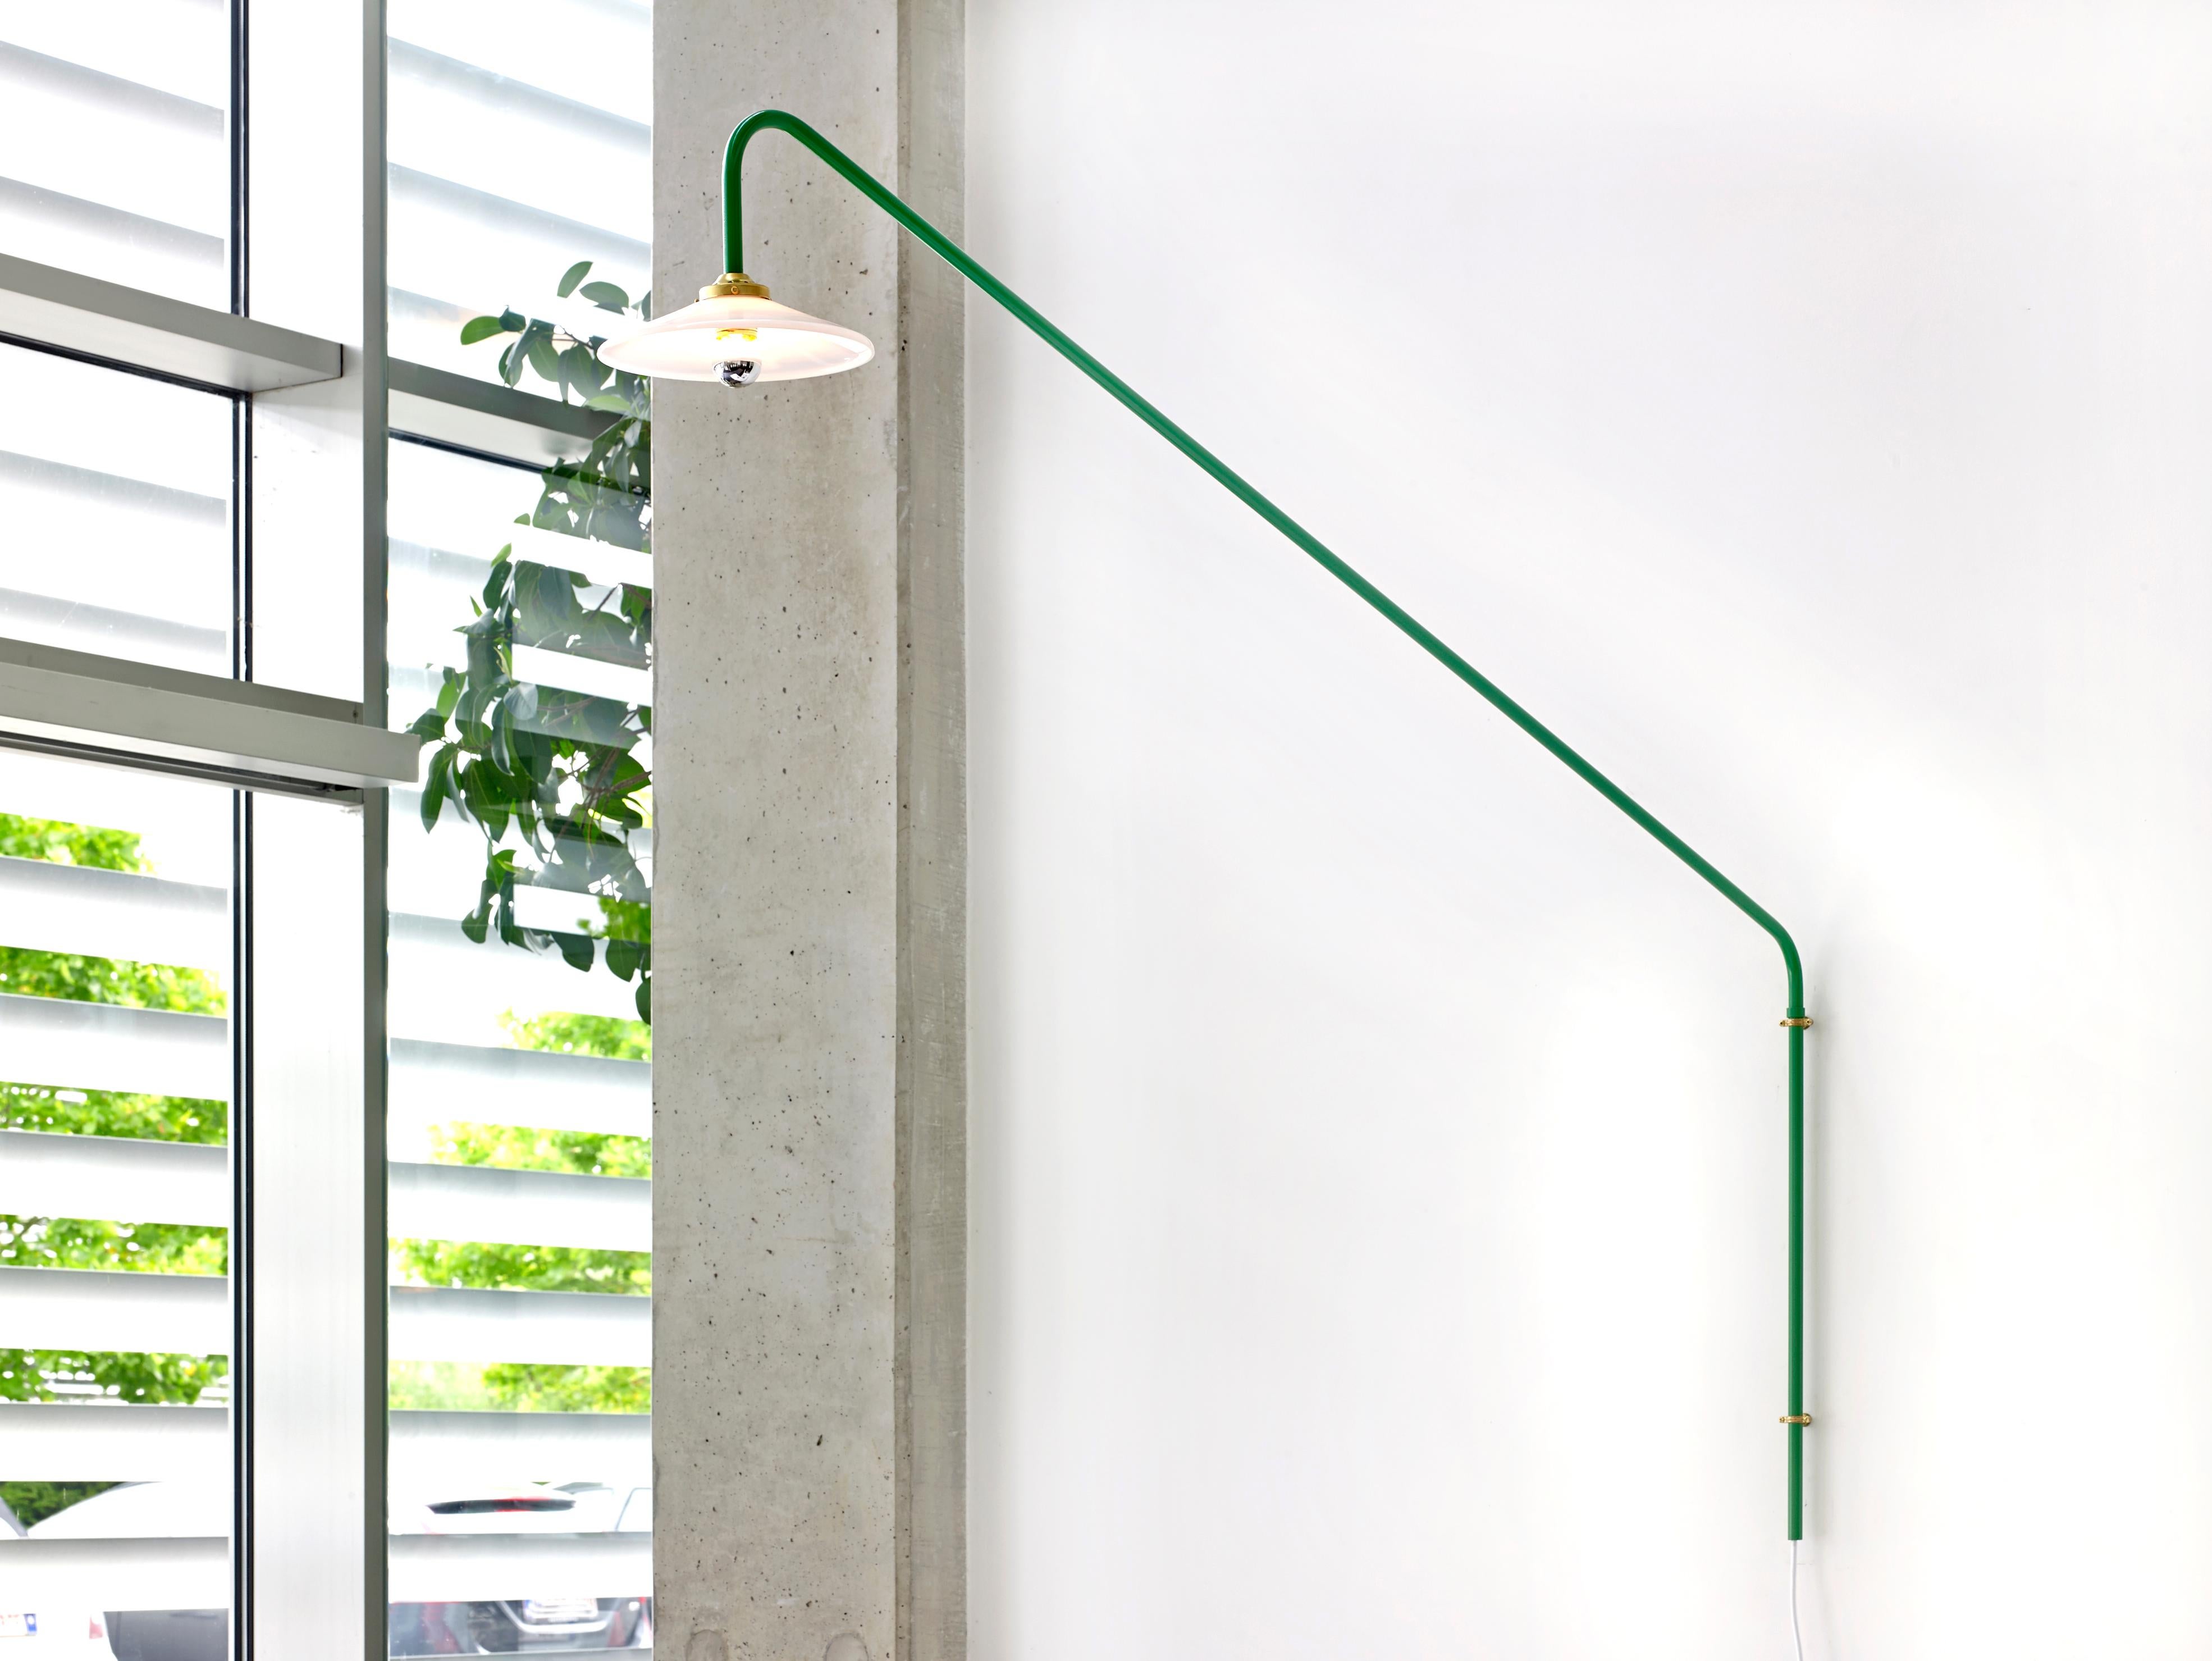 Hanging Lamp N°1 by Muller Van Severen x Valerie Objects

Dimensions: H. 140 X 183 X 25
Finish: Blue

specifications
— light source: 4W led
— colour tempertaure: K2700 — lumen 350
— IP rating 20
— dimmable

material: 
— lamp frame in steel tube 18mm